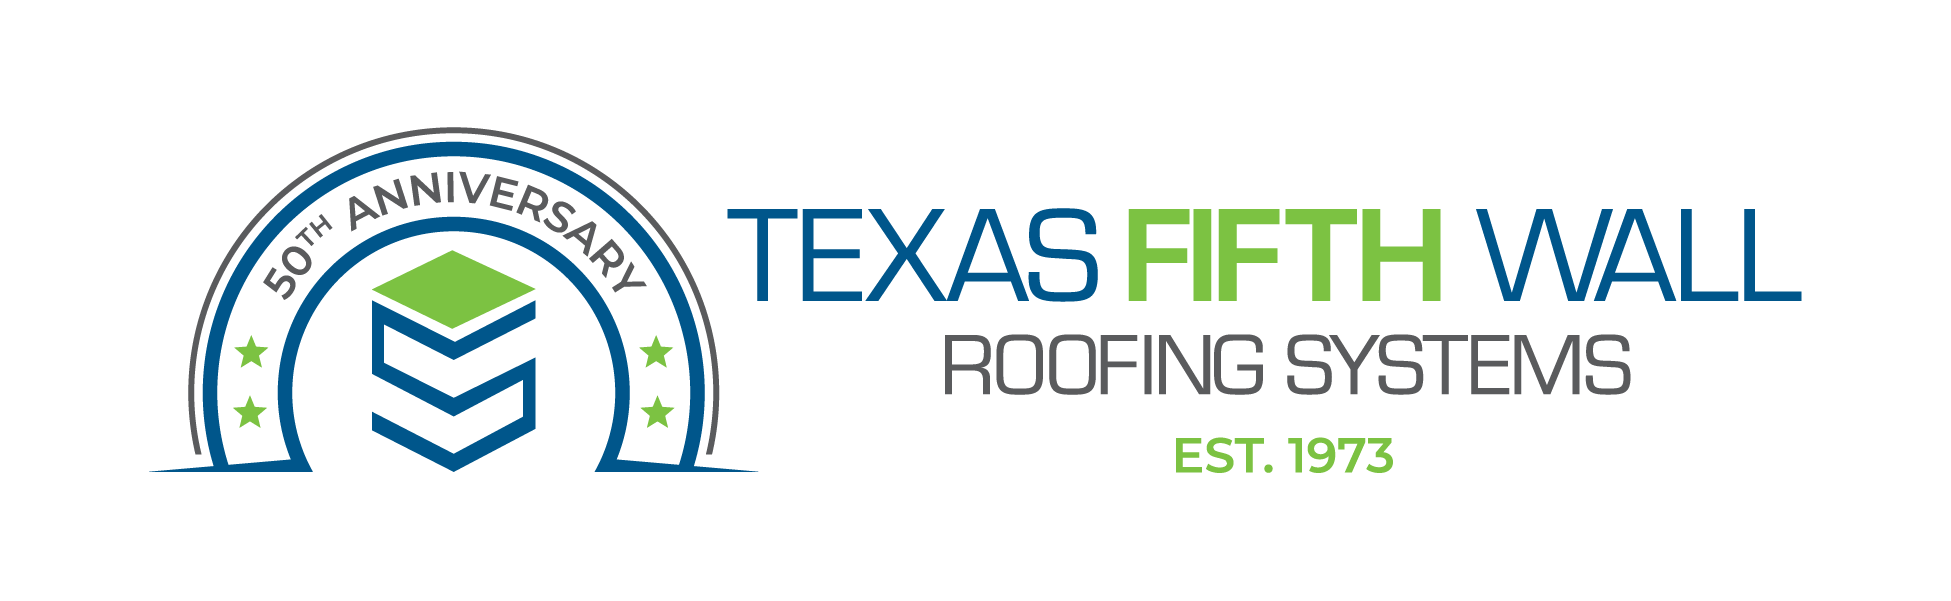 Fifth Wall Roofing